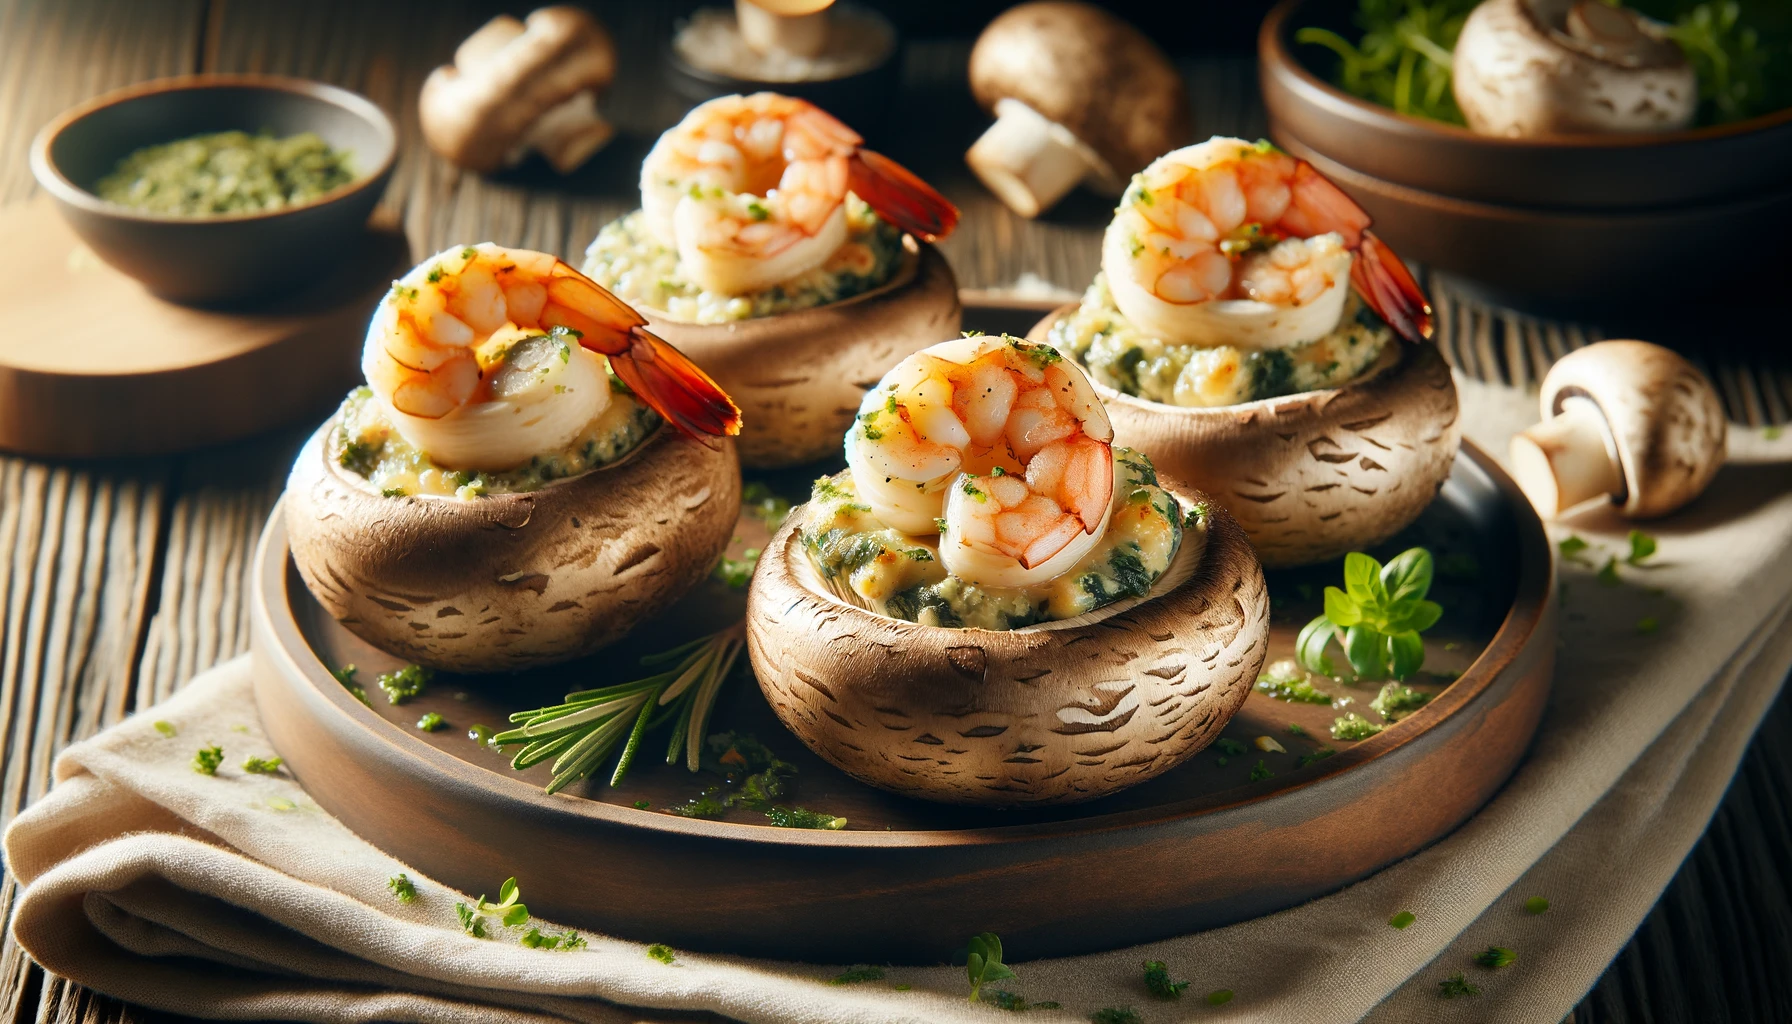 Stuffed mushrooms with shrimp and herbs on wooden tray.